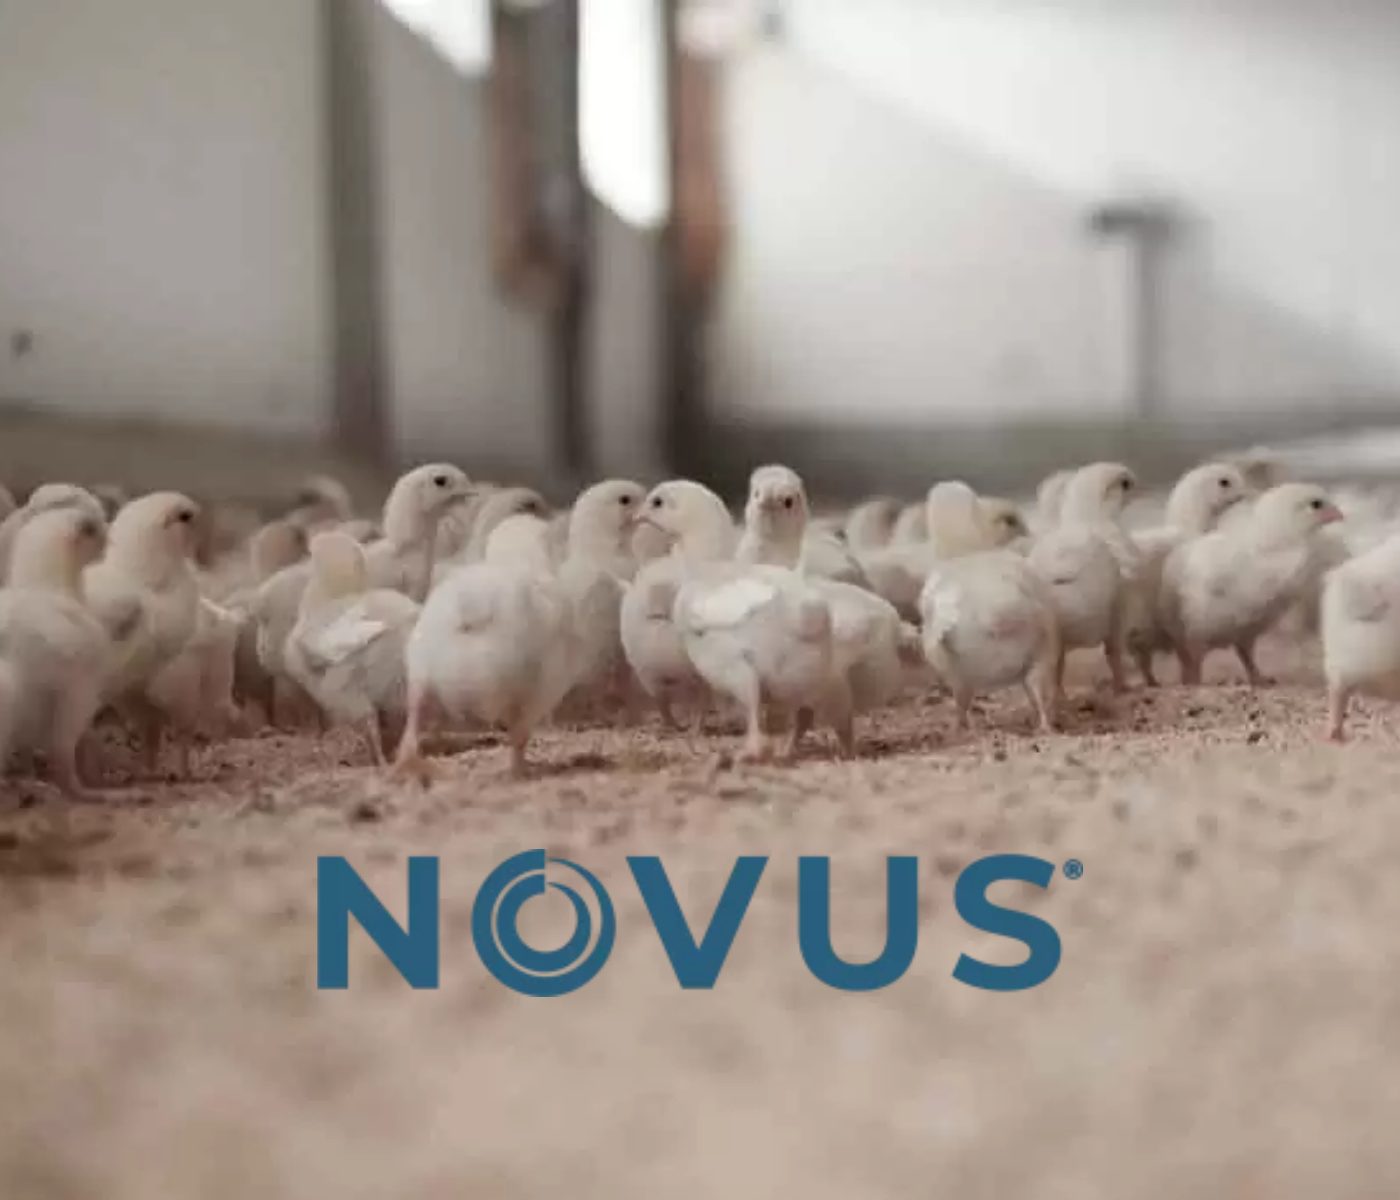 NOVUS Spotlights Poultry Industry Challenges at Symposium in Poland